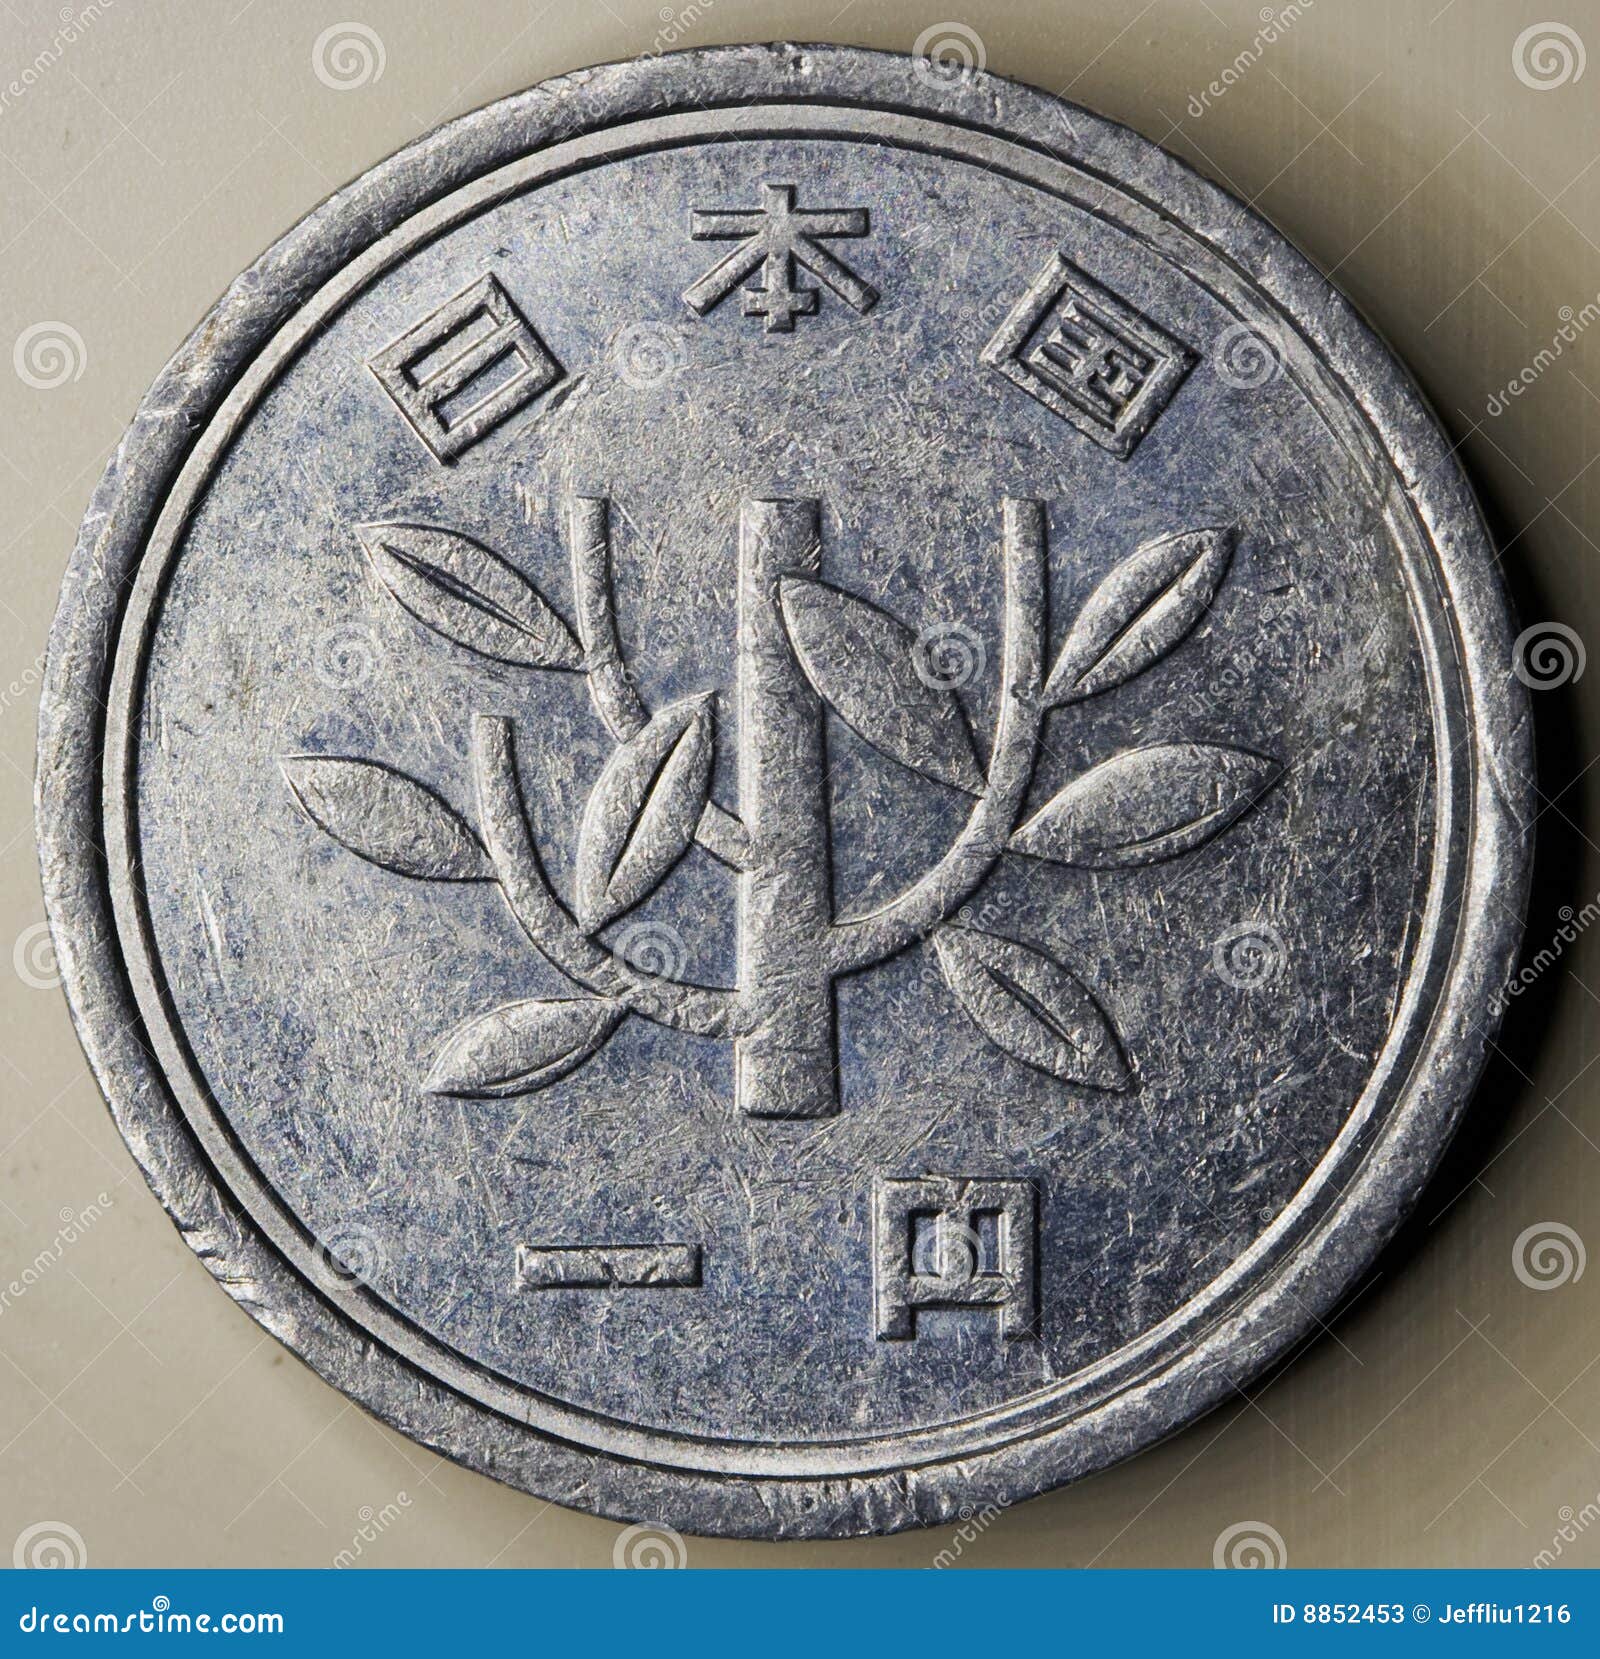 Japanese coin dating